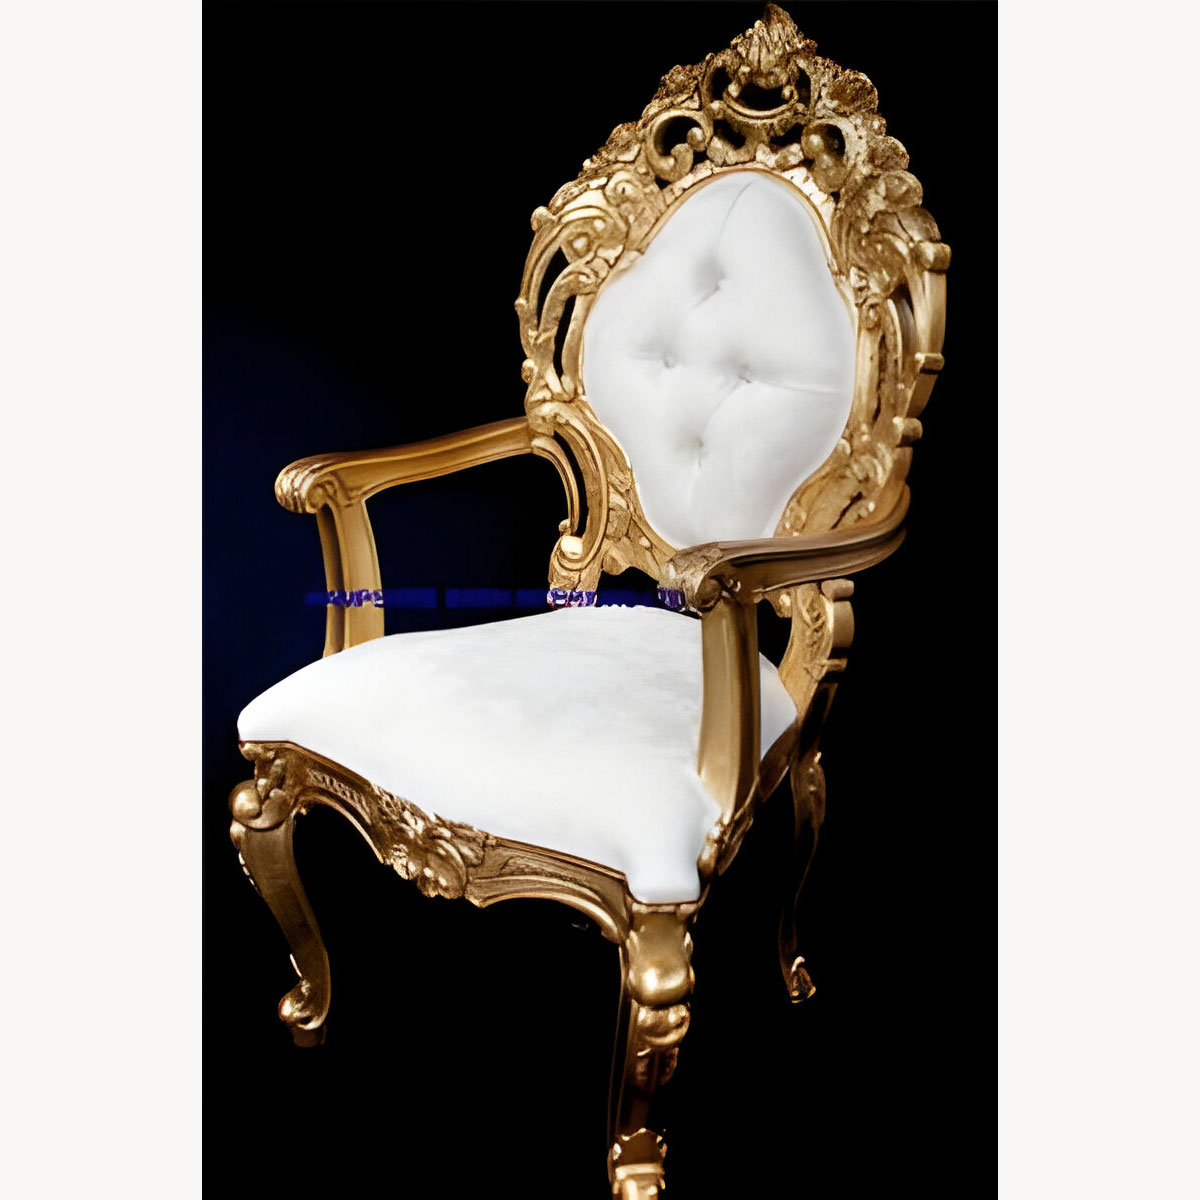 Large Mayfair Wedding Sofa In Gold Leaf Frame 3 Seater With Ivory Cream Damask With Two Matching Palace Throne Chairs Crystal Buttoning 4 - Hampshire Barn Interiors - Large Mayfair Wedding Sofa In Gold Leaf Frame 3 Seater With Ivory Cream Damask With Two Matching Palace Throne Chairs Crystal Buttoning -